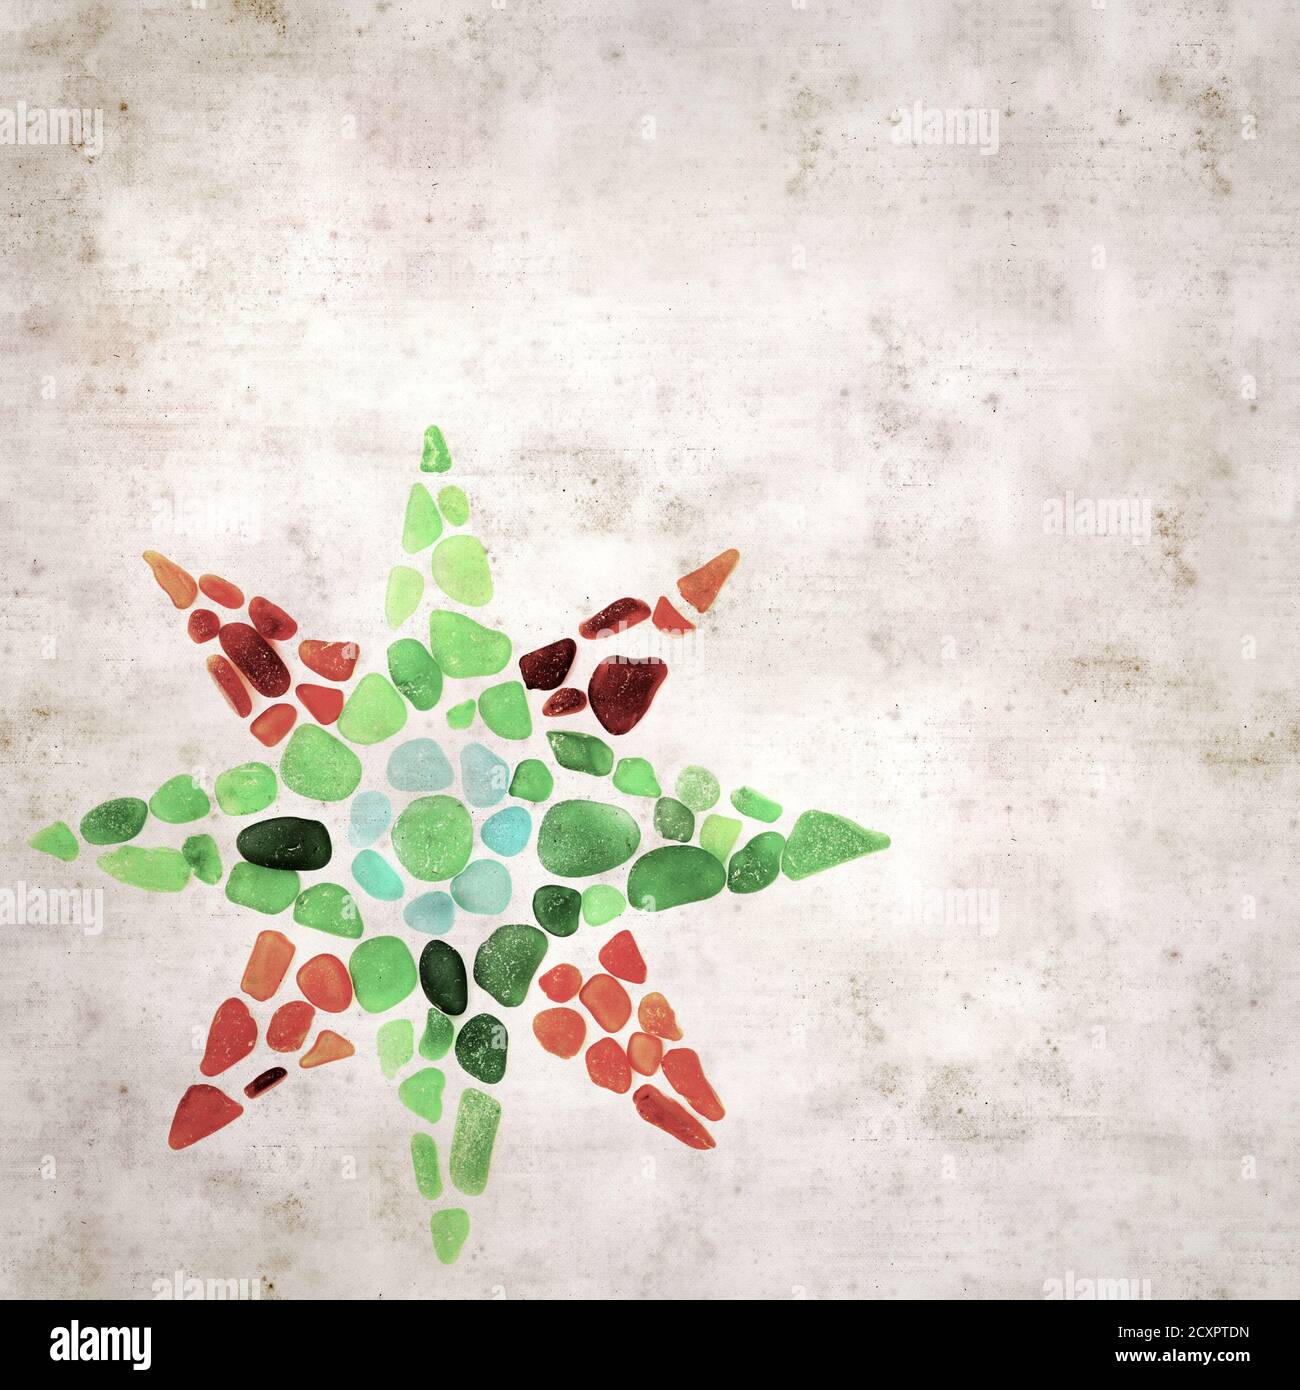 textured stylish old paper background, square, with Star of Ishtar symbol made of seaglass Stock Photo